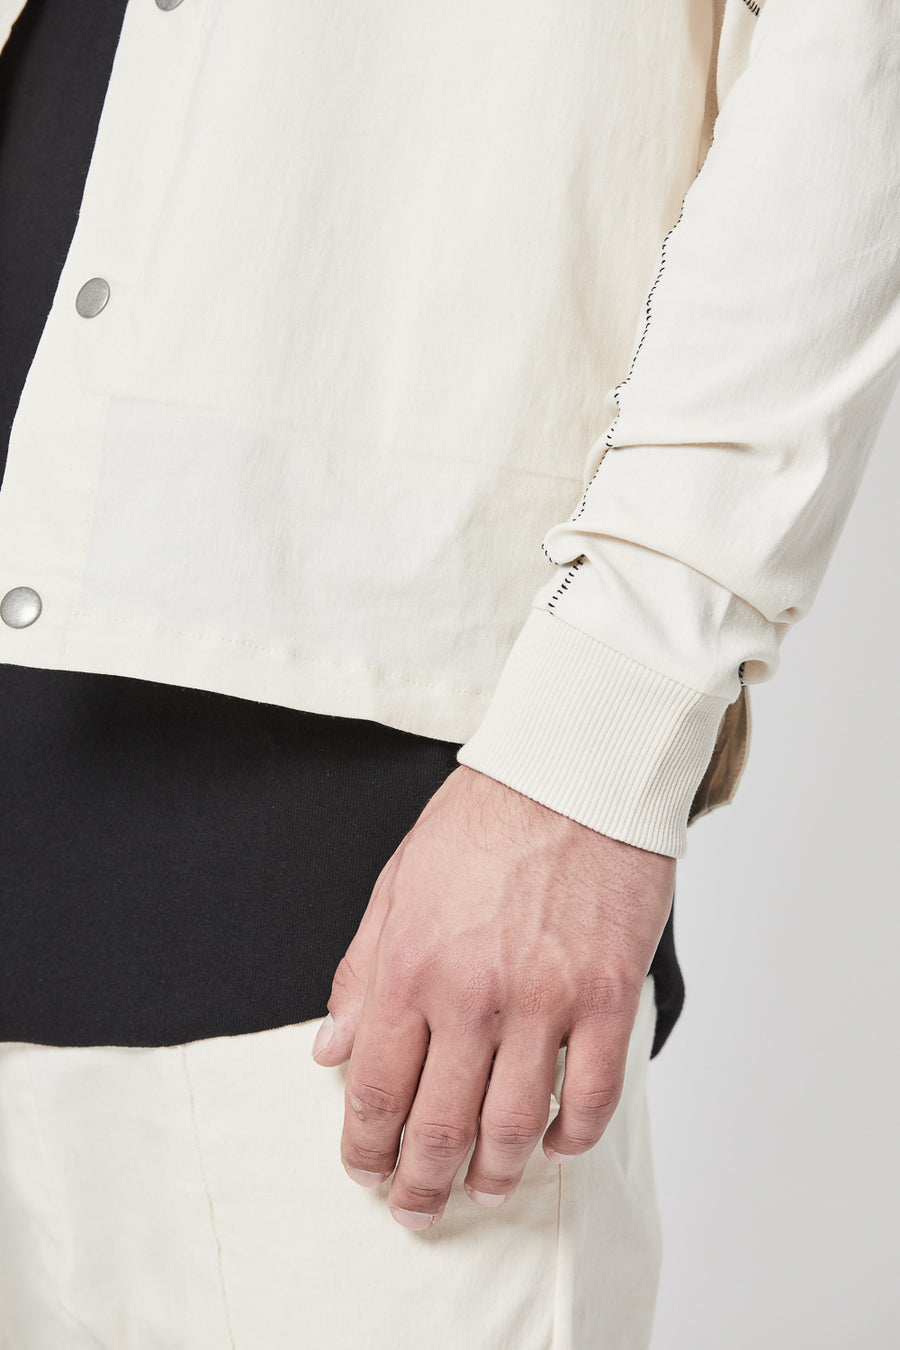 Buy the Thom Krom M SJ 583 Jacket in Ivory at Intro. Spend £50 for free UK delivery. Official stockists. We ship worldwide.